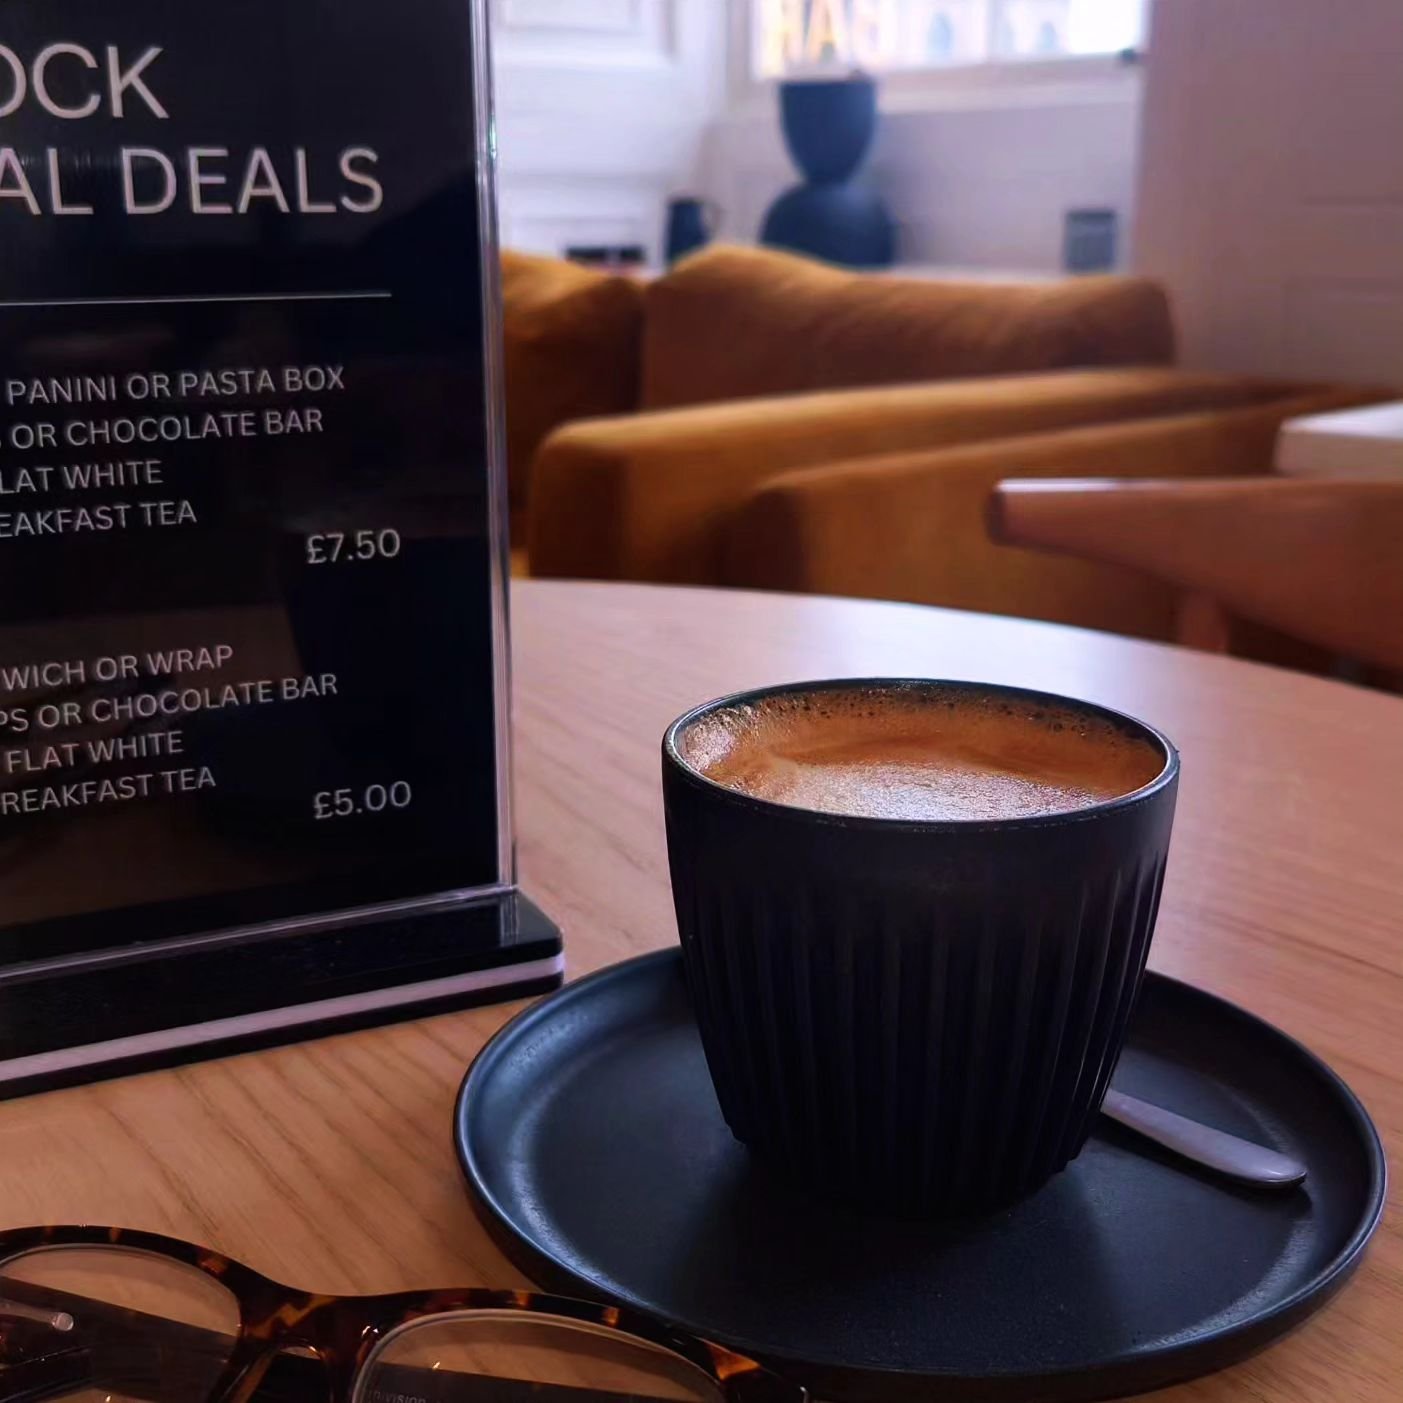 Took shelter from that biting wind in the warmth of @_blockcafe_ this morning - might have had a couple of strong coffees to refuel too, just the ticket!! 

Brilliant to meet up with the fabulous @rockoystermedia team - excited for the next TV projec